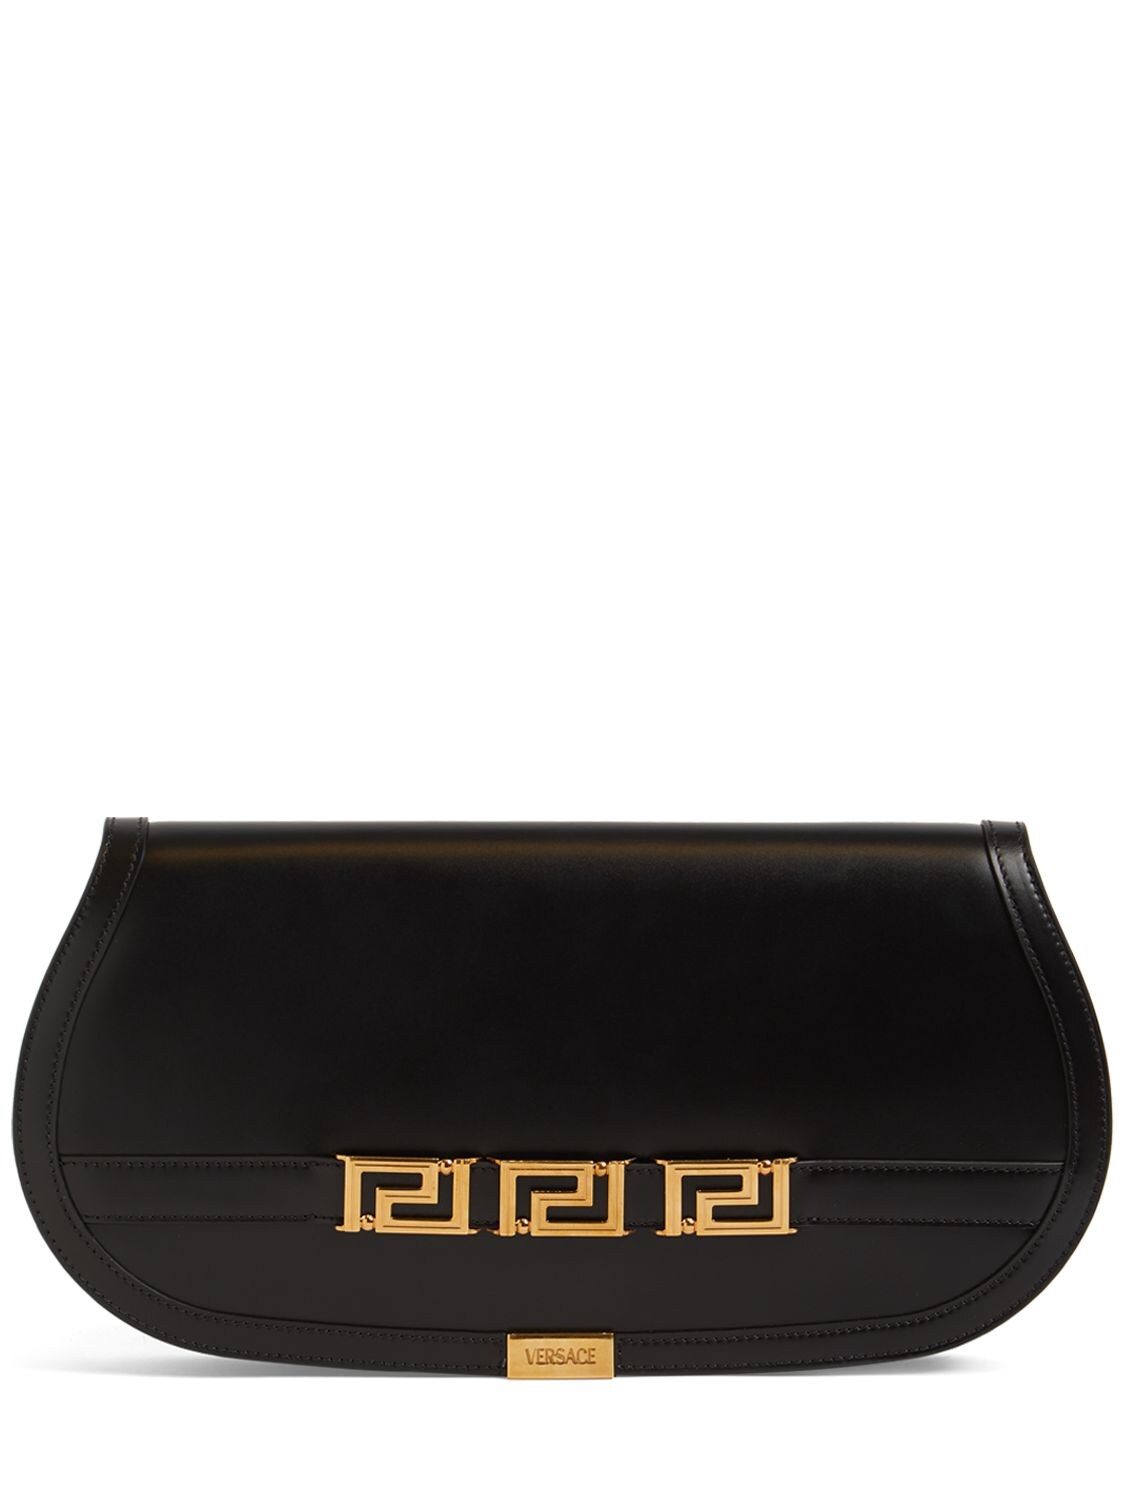 Greca Goddess Rounded Leather Clutch